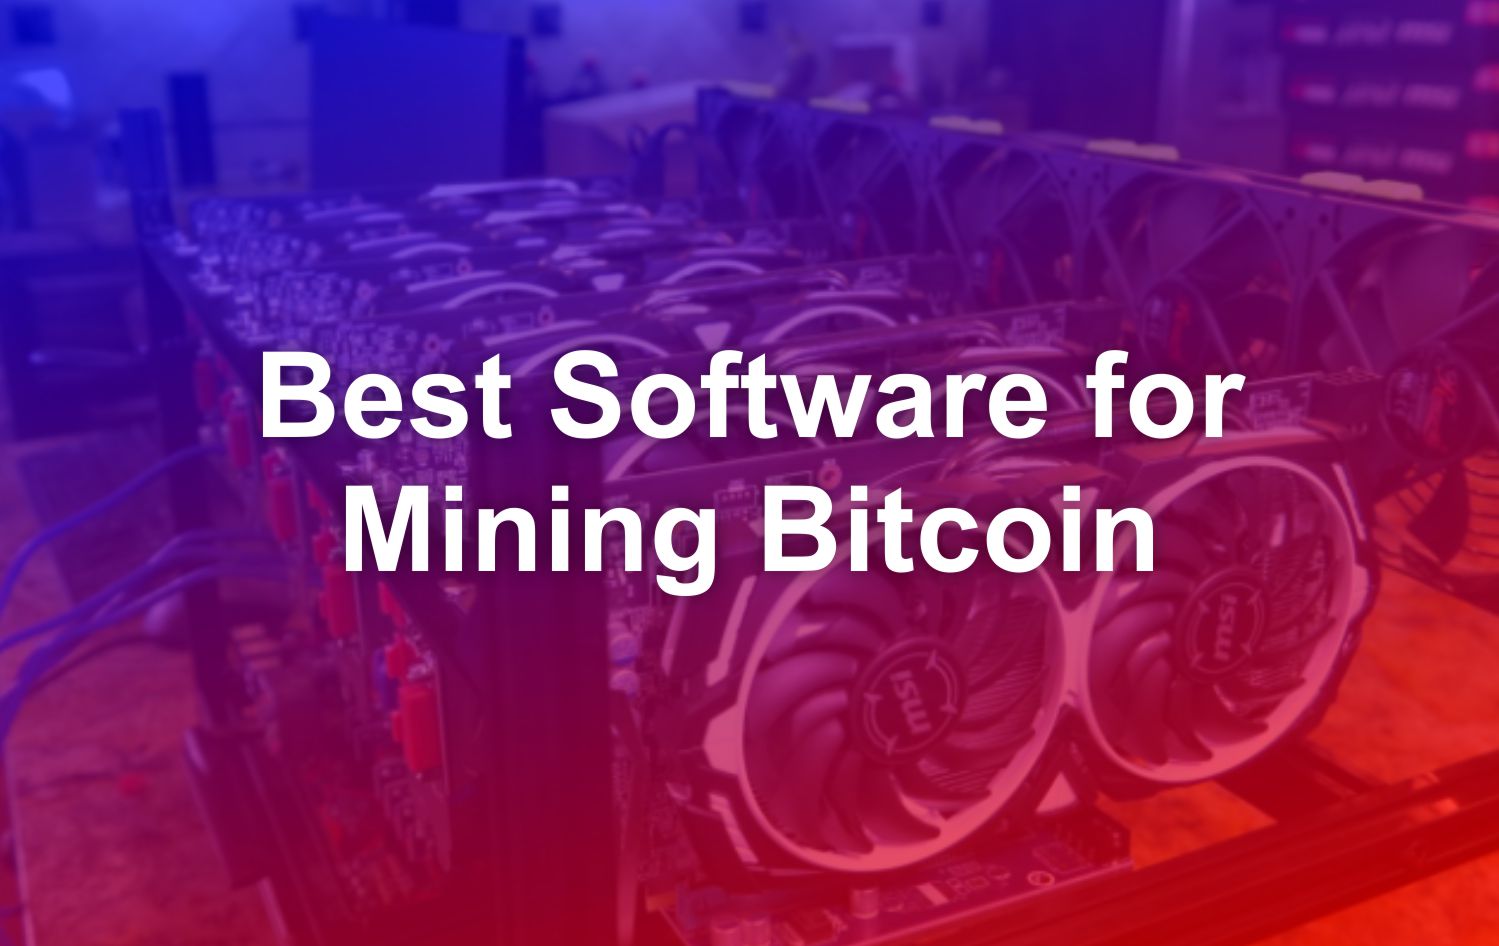 5 Best Software for Mining Bitcoin